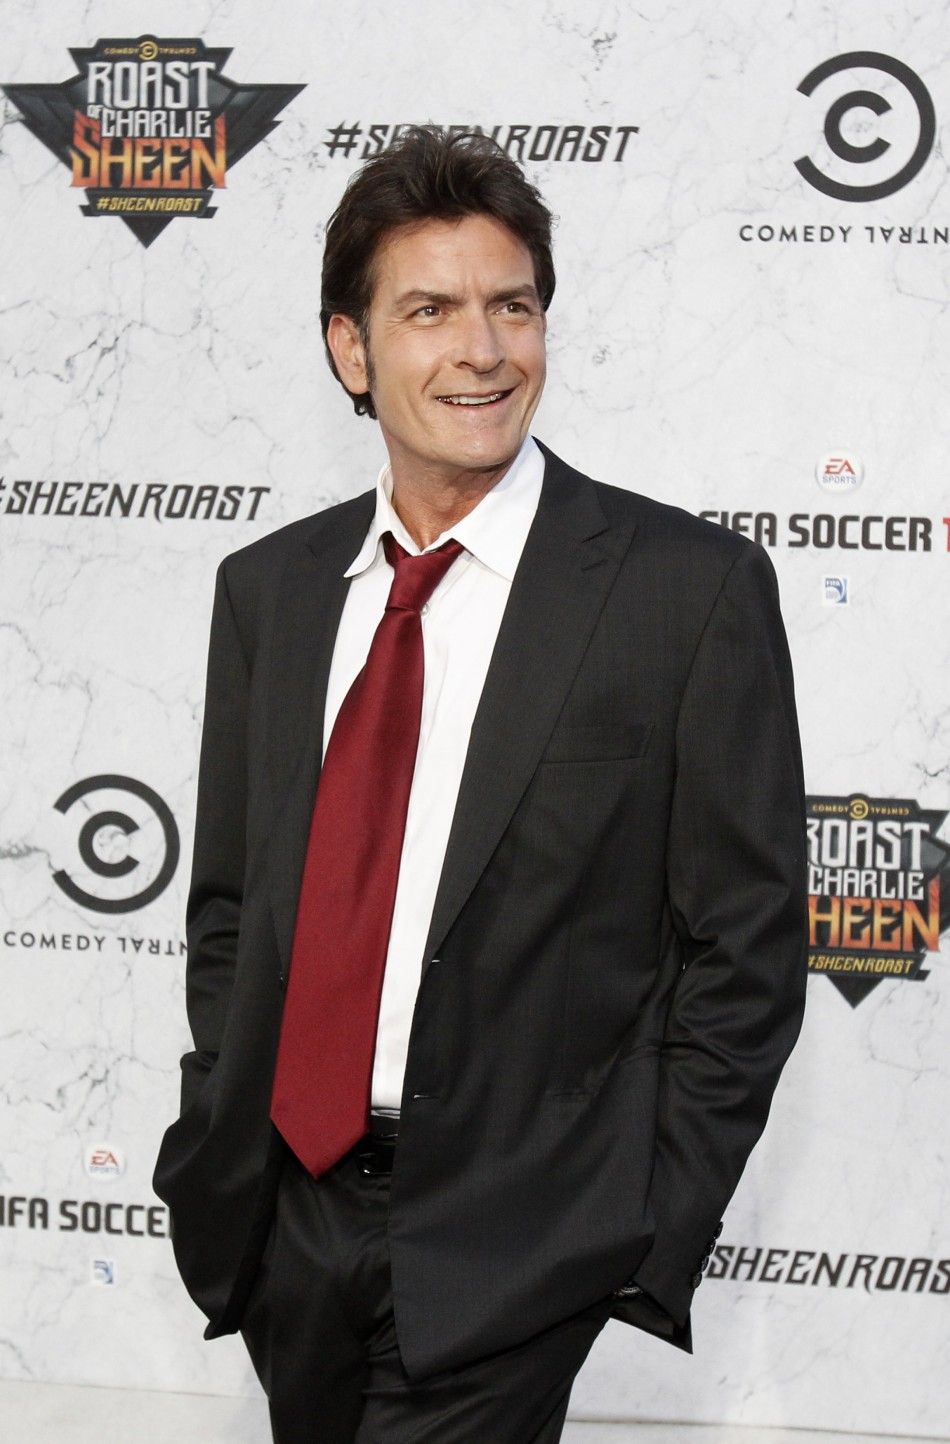 Charlie Sheen Fired from quotTwo and a Half Menquot